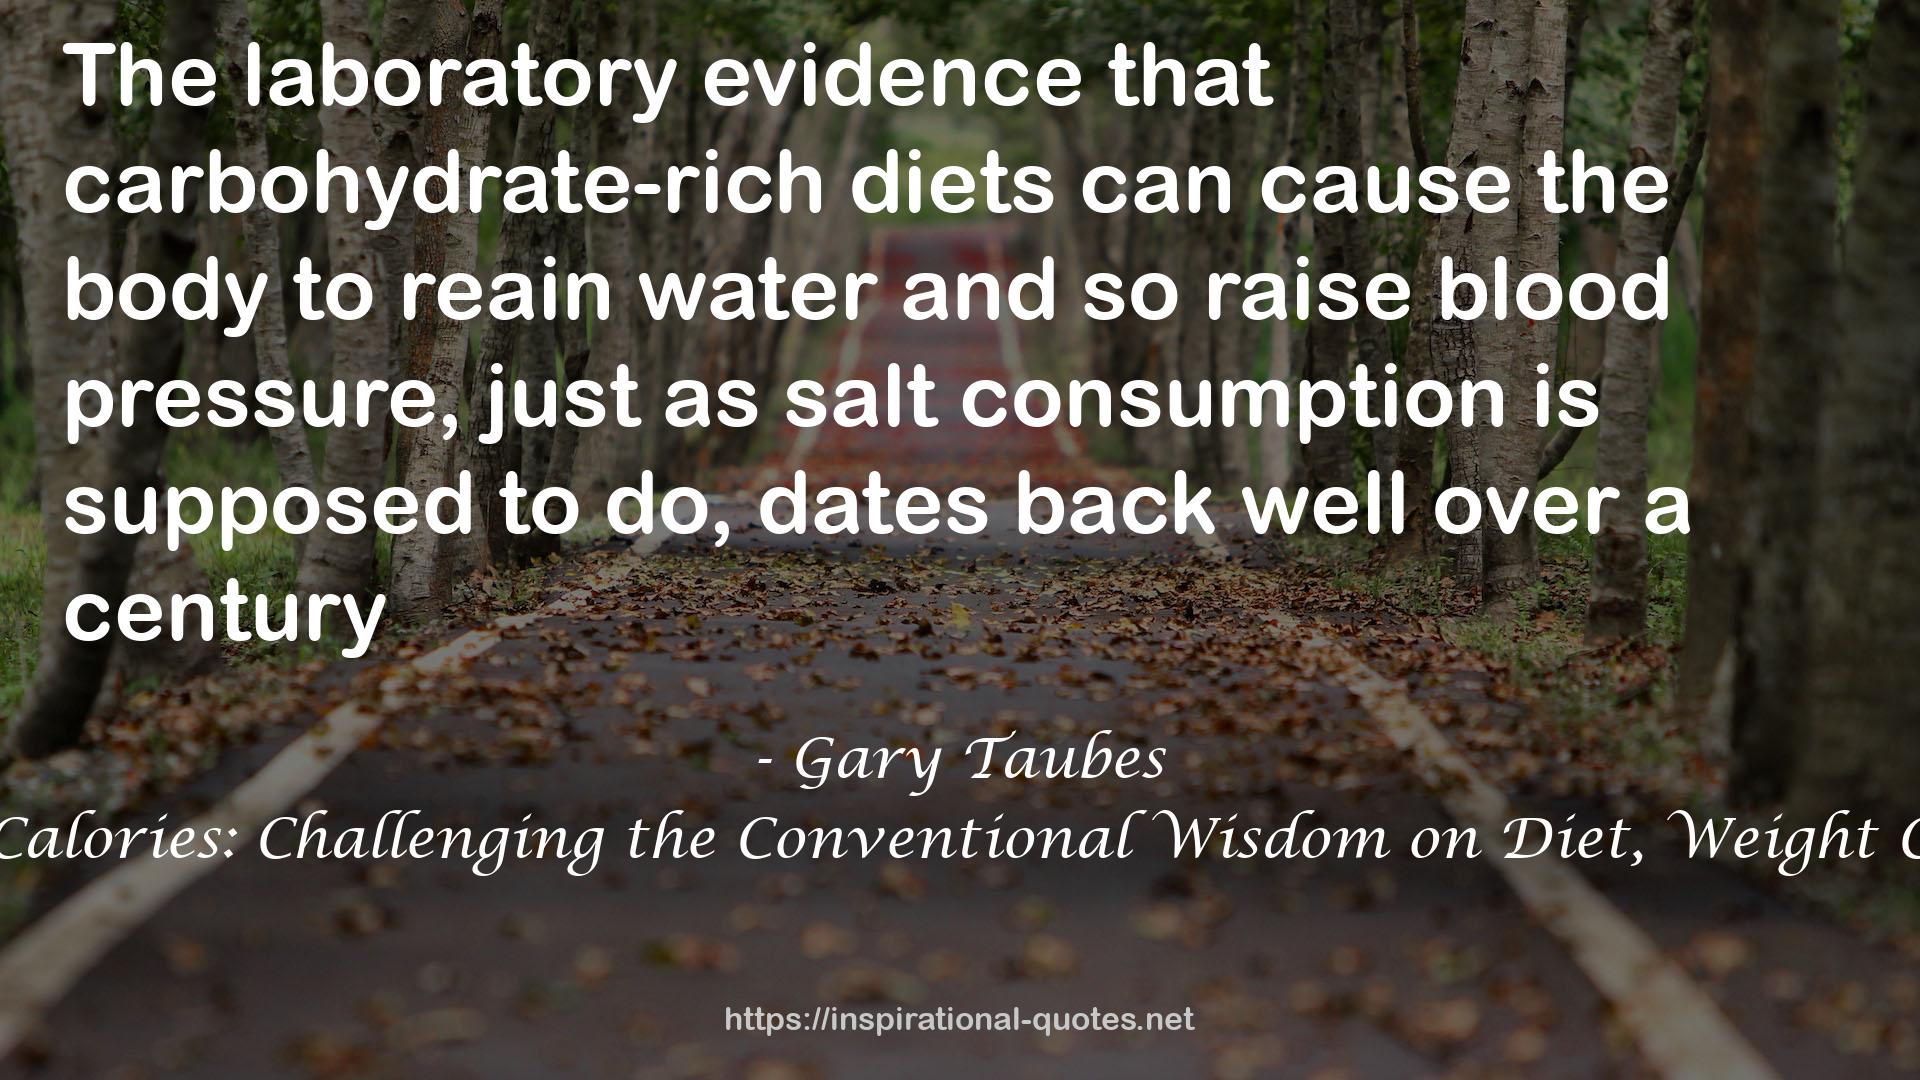 Good Calories, Bad Calories: Challenging the Conventional Wisdom on Diet, Weight Control, and Disease QUOTES